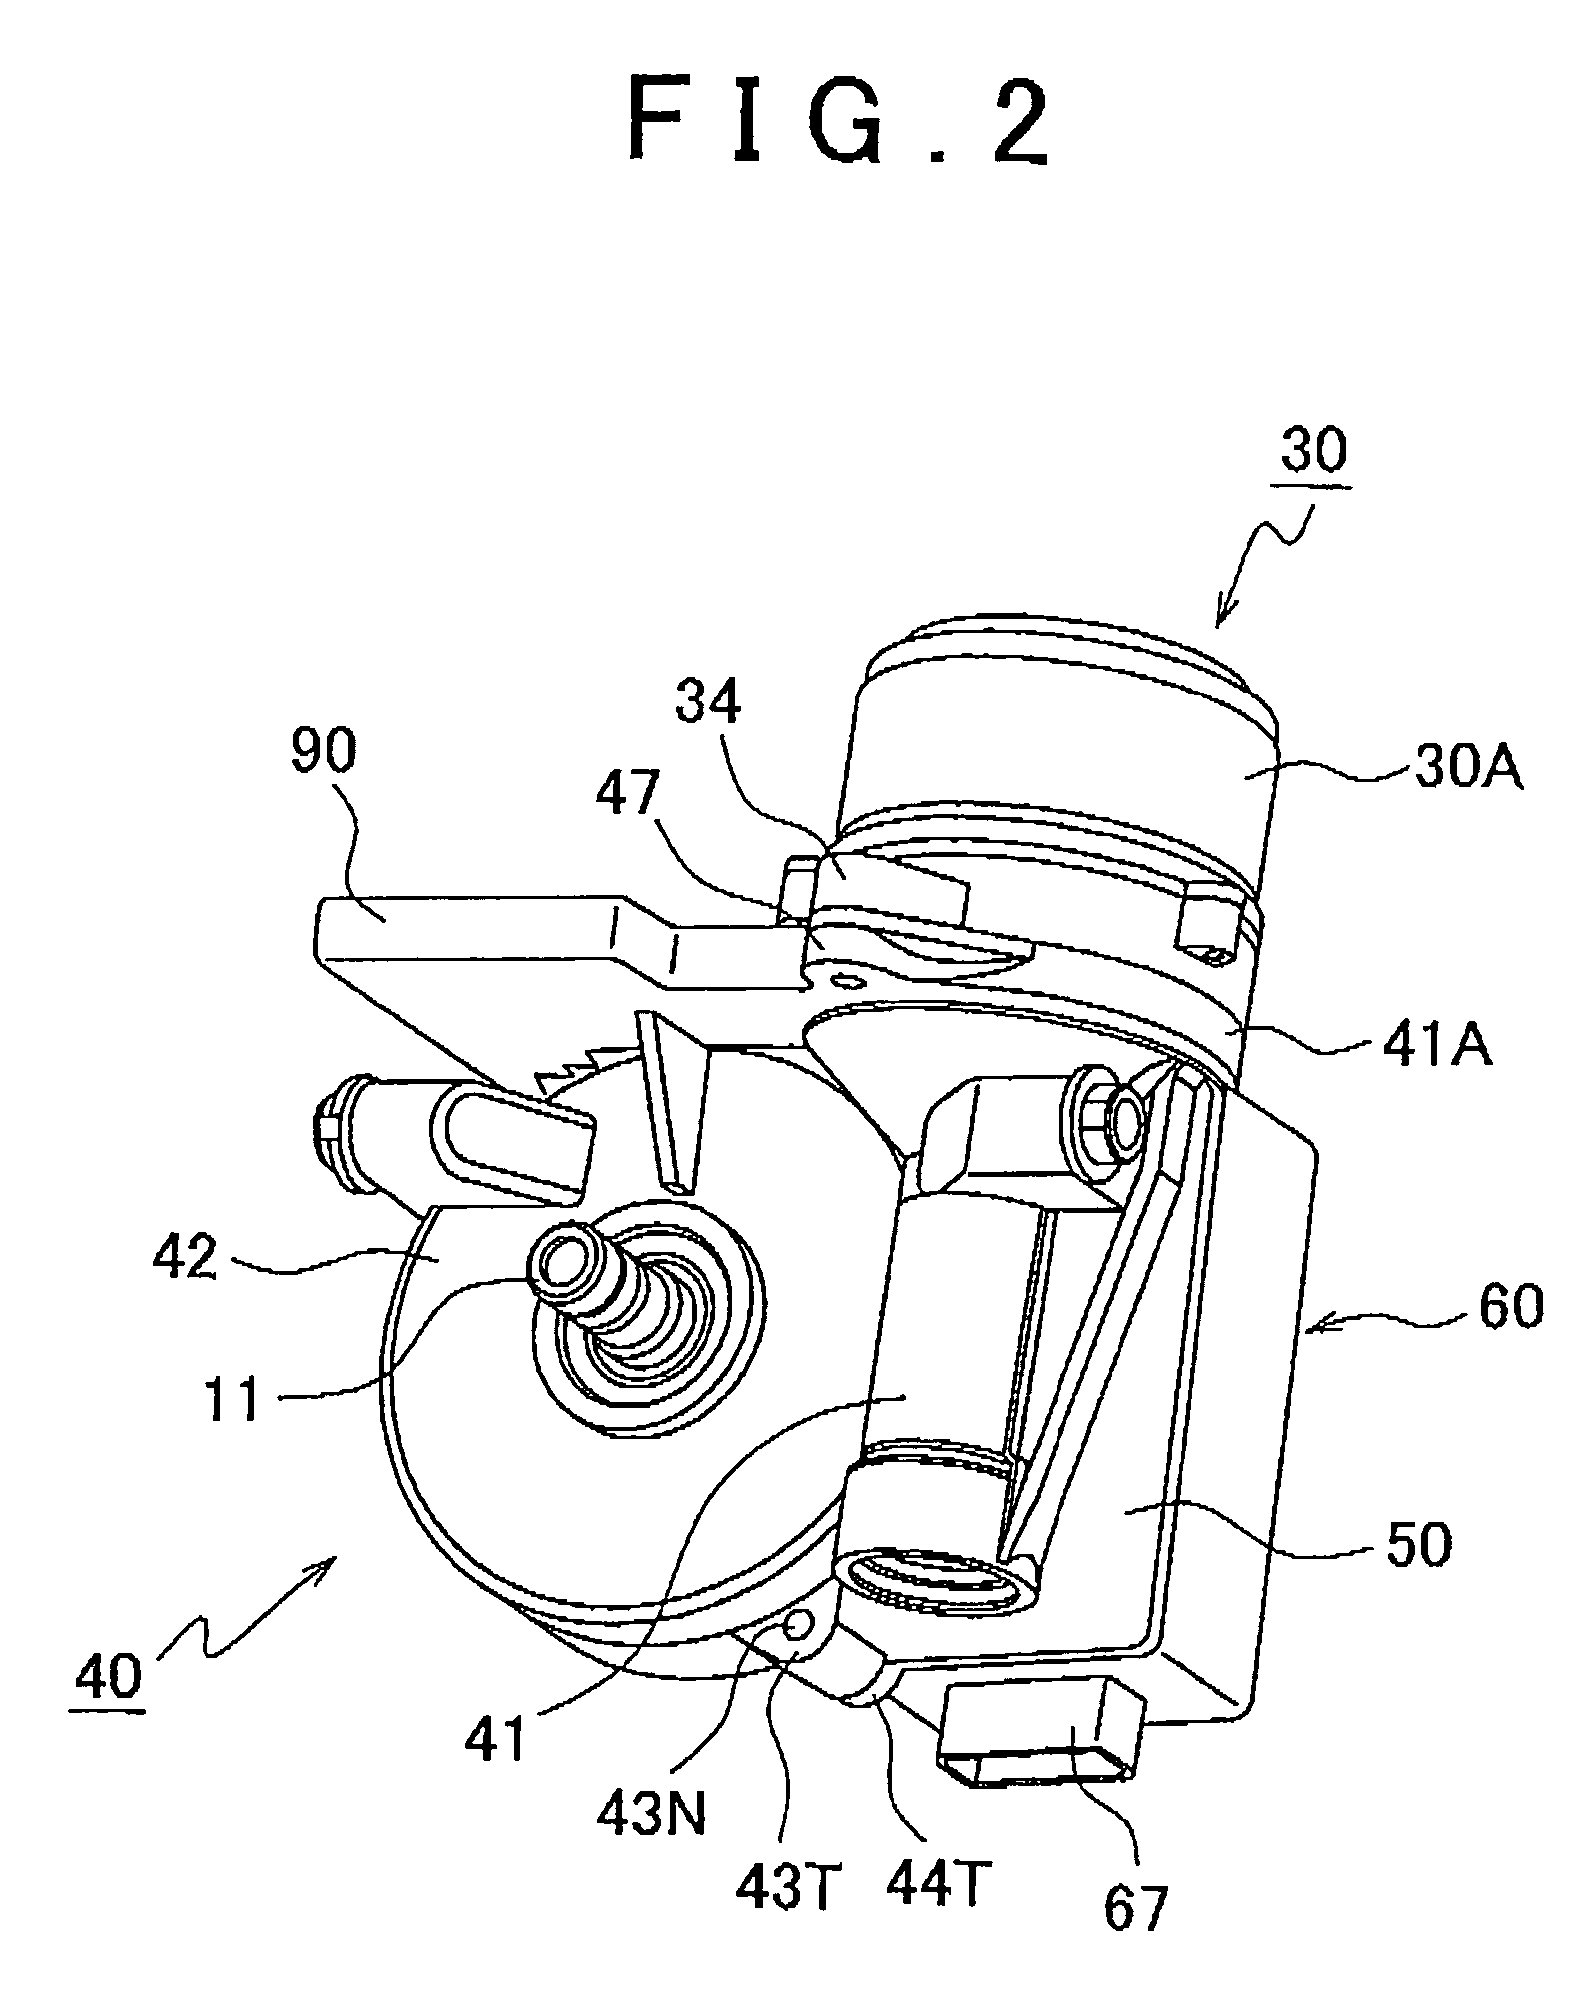 Electric power steering system